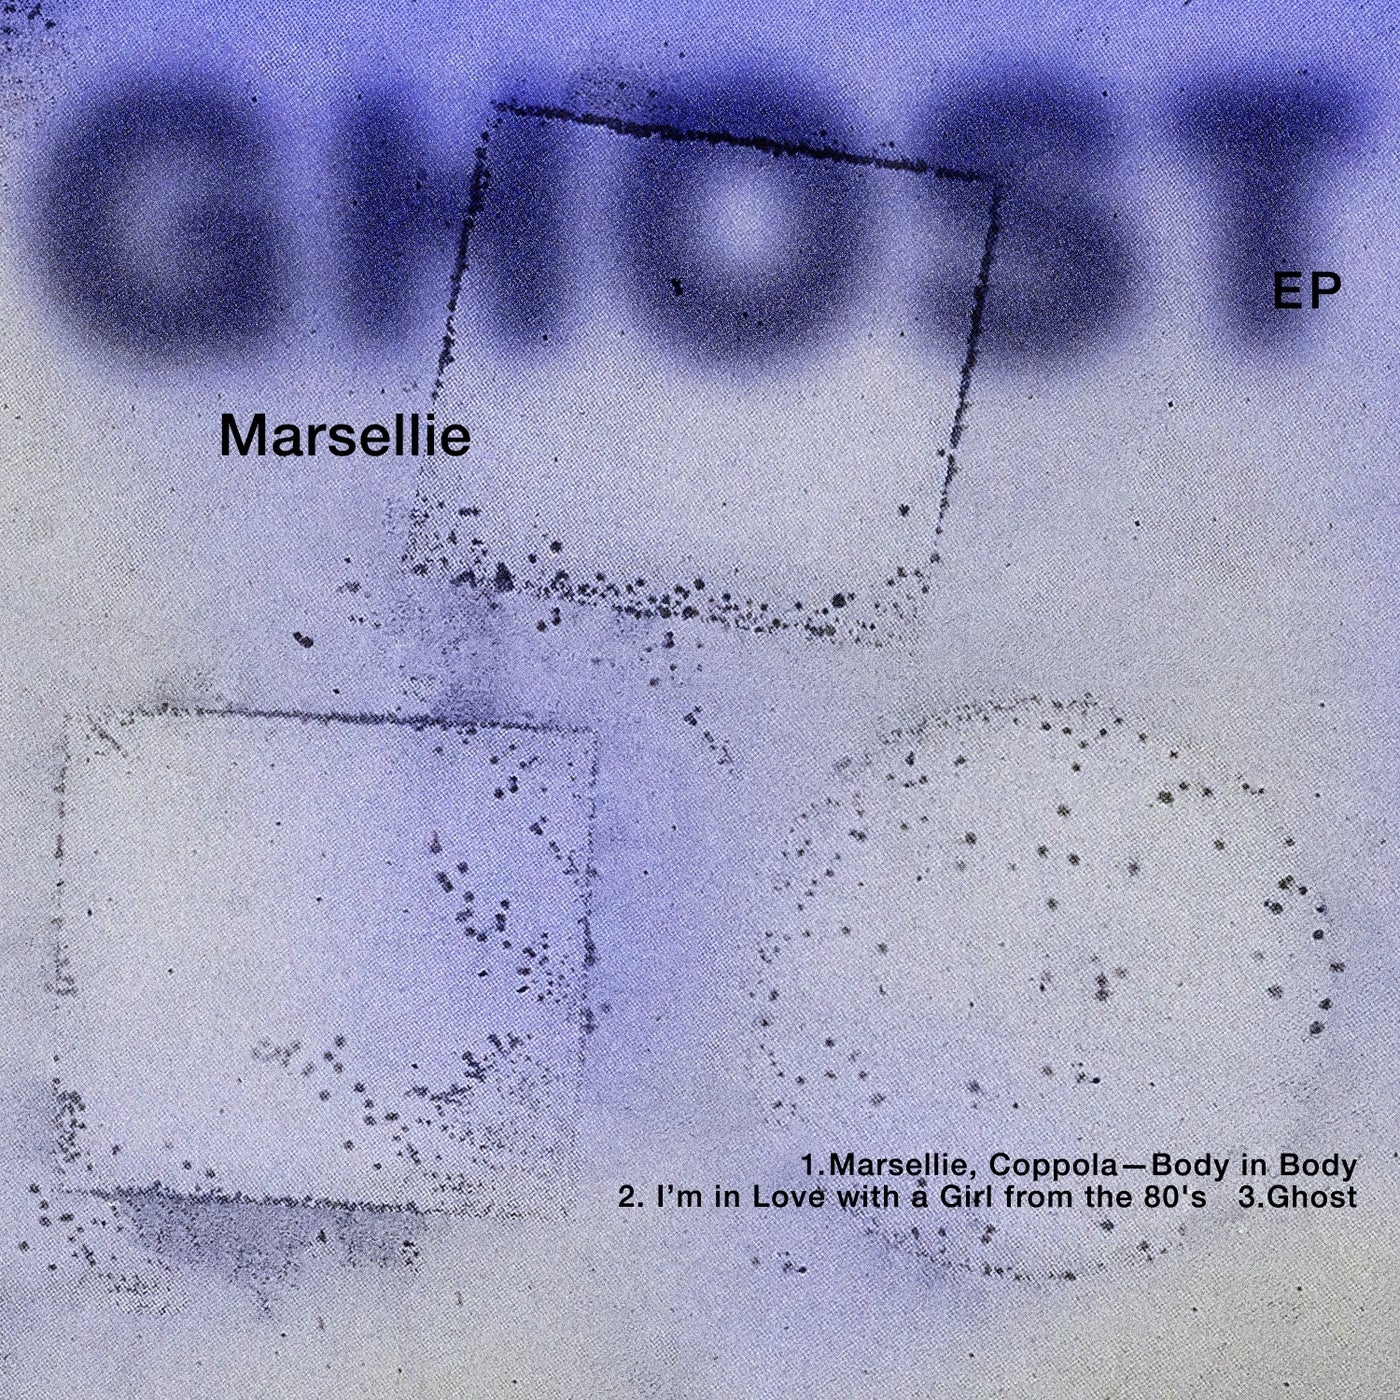 image cover: Marsellie - Ghost EP on Diynamic